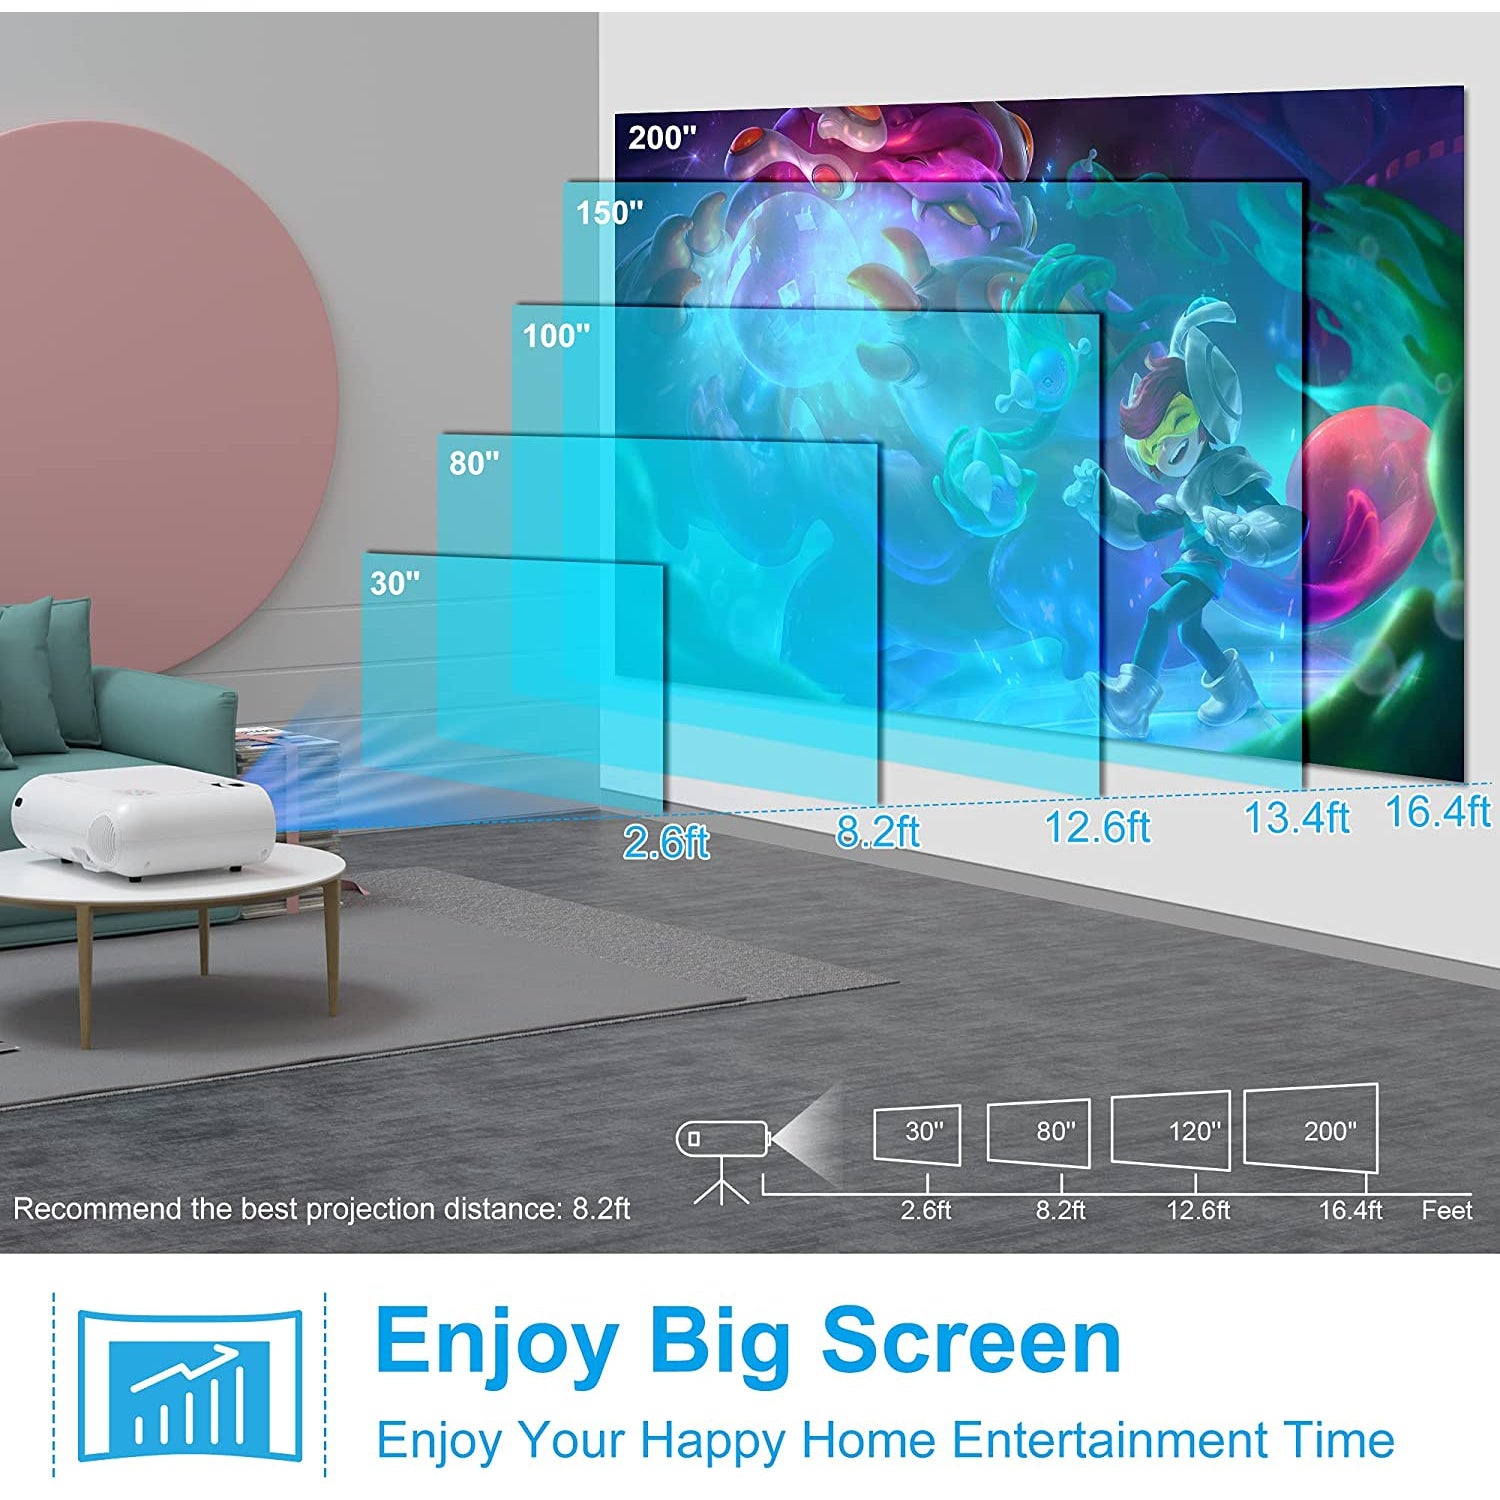 Bacar Smart LED Projector with Projector Screen